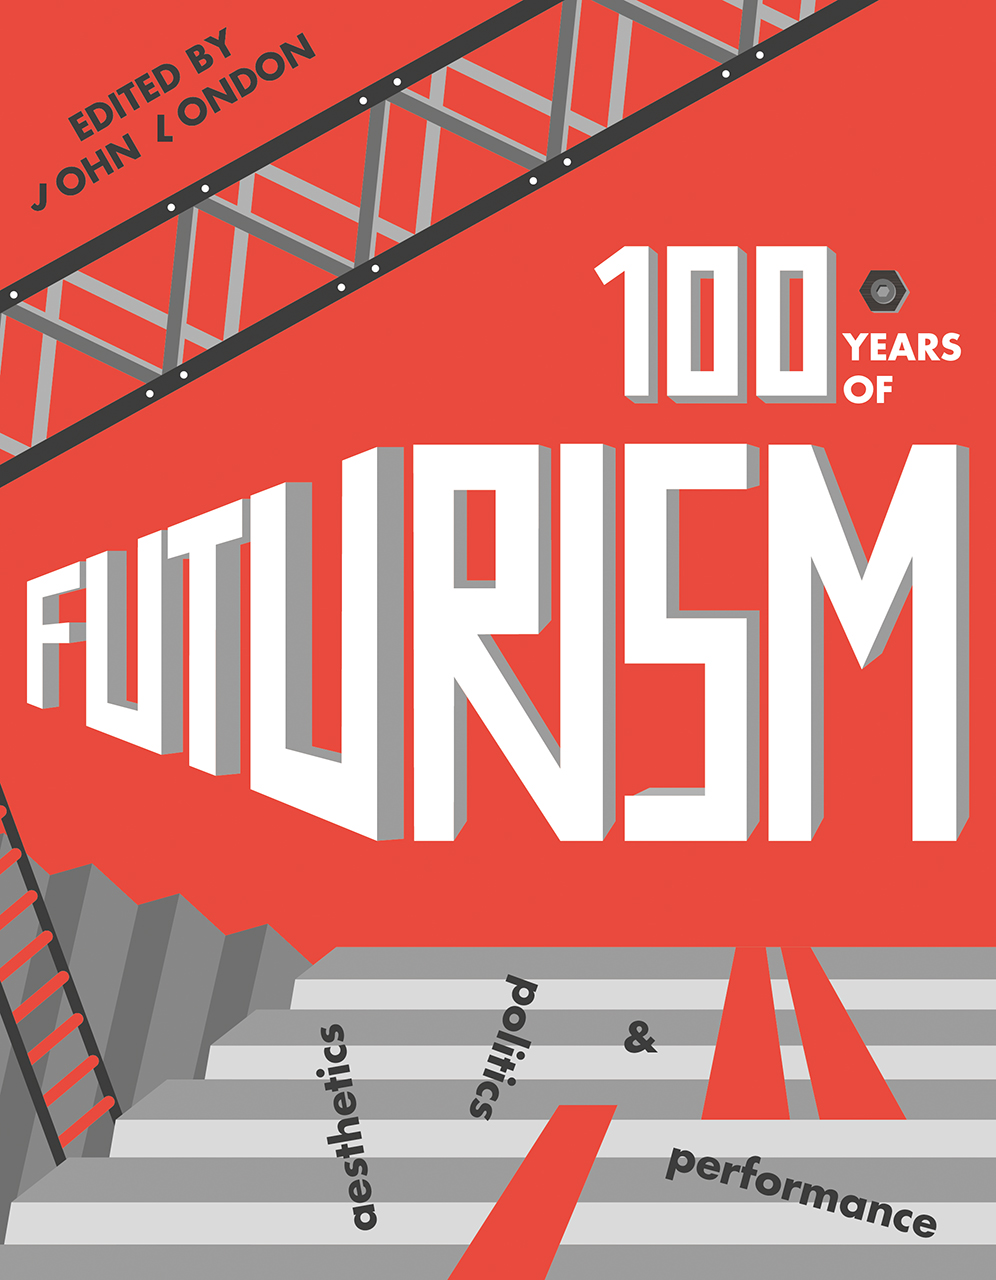 image of One Hundred Years of Futurism